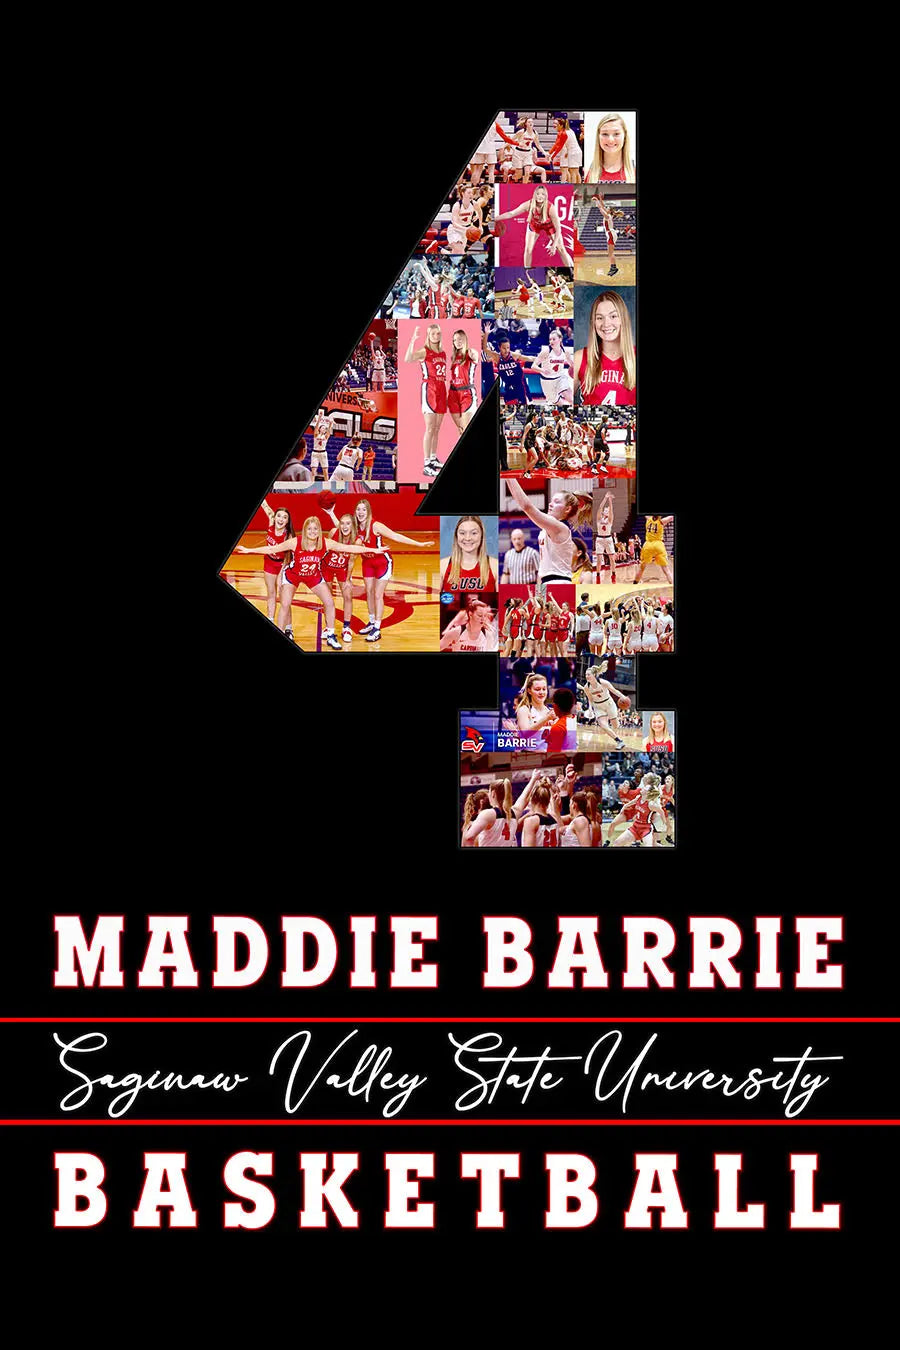 Basketball player #4 collage: customize senior night posters for basketball players